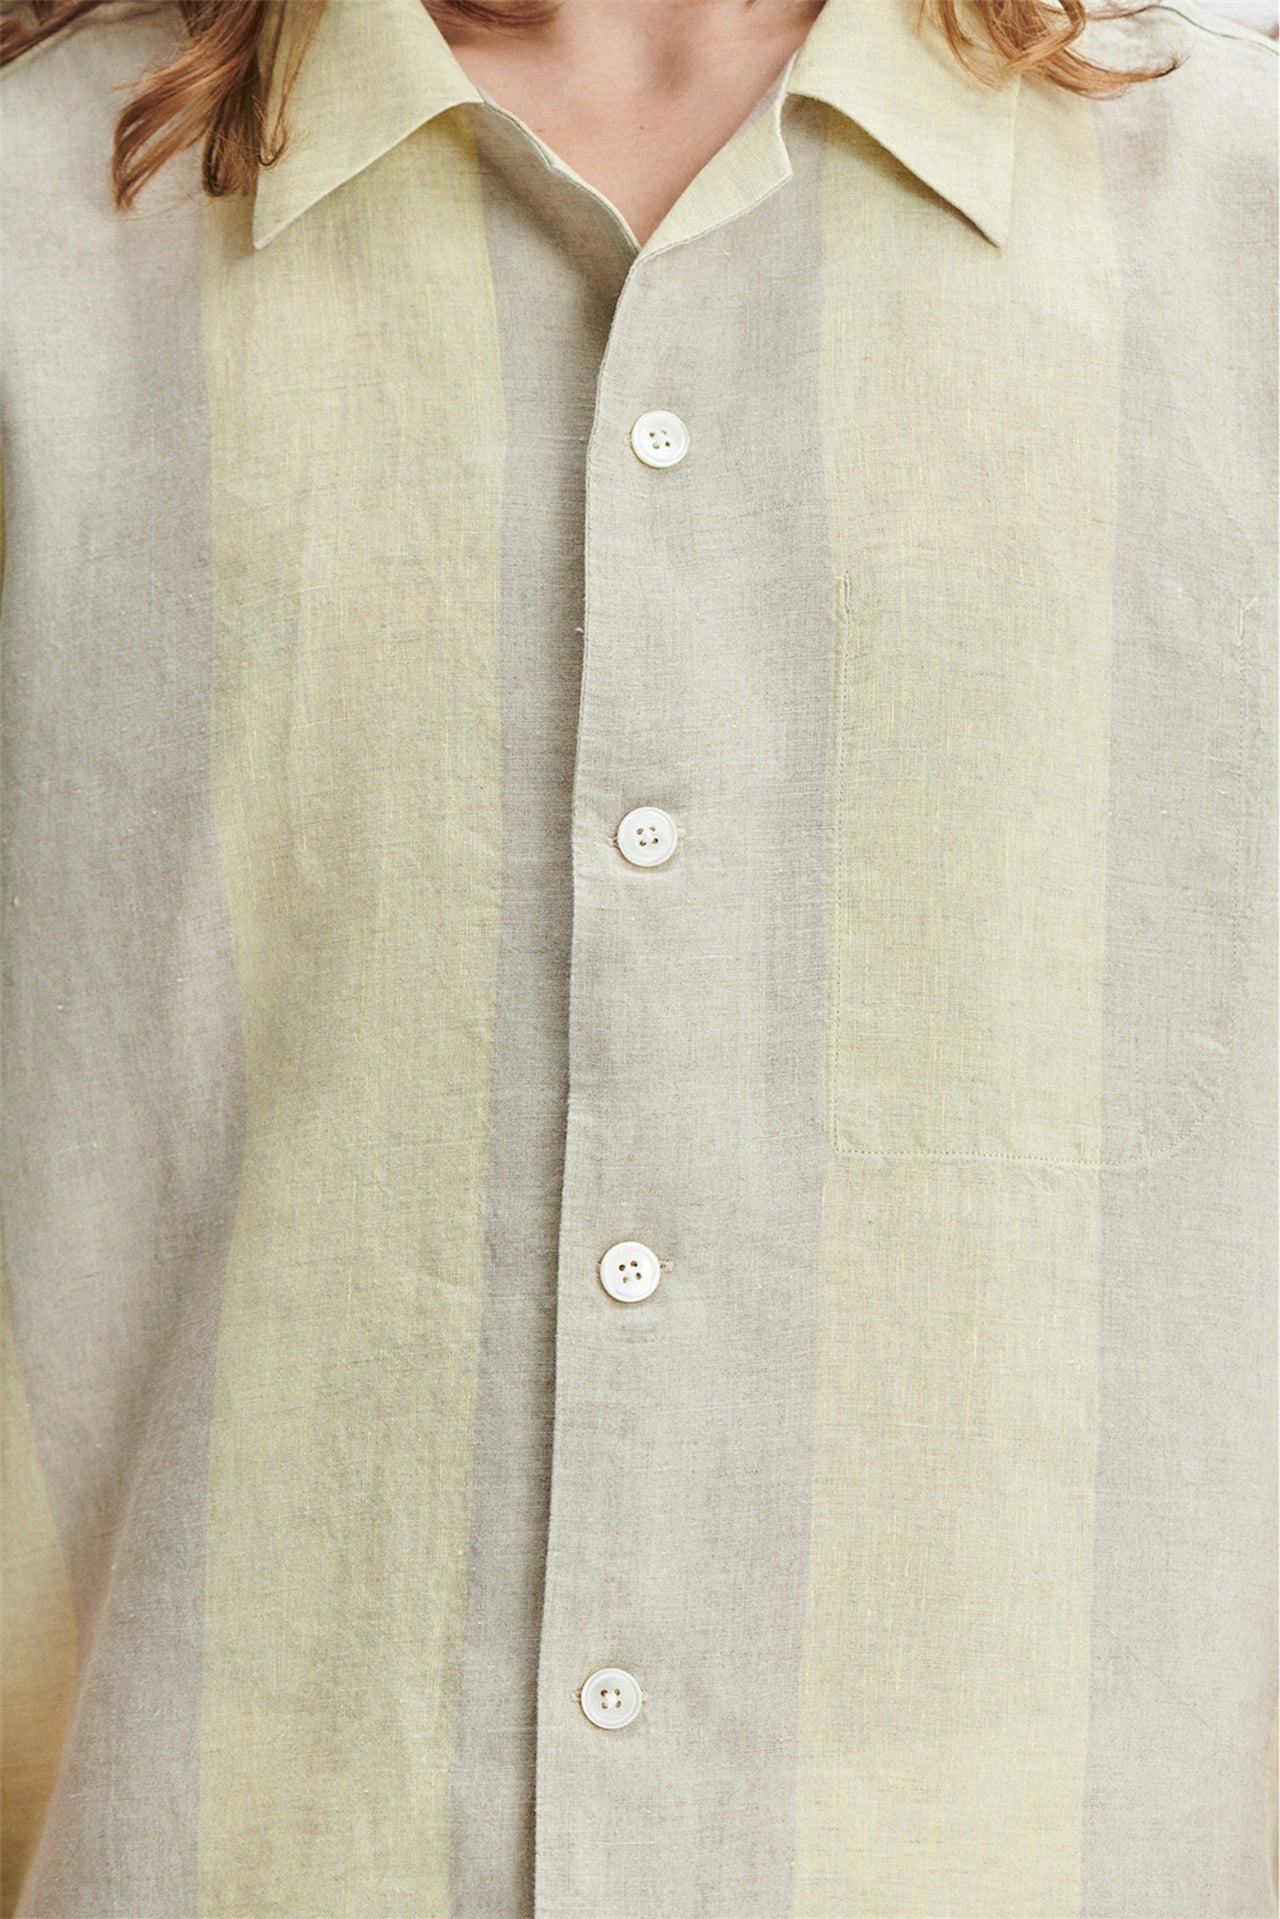 Relaxed Cuban Collar Shirt in Yellow and Beige Striped Superb Italian Traceable Linen - On-line Exclusive